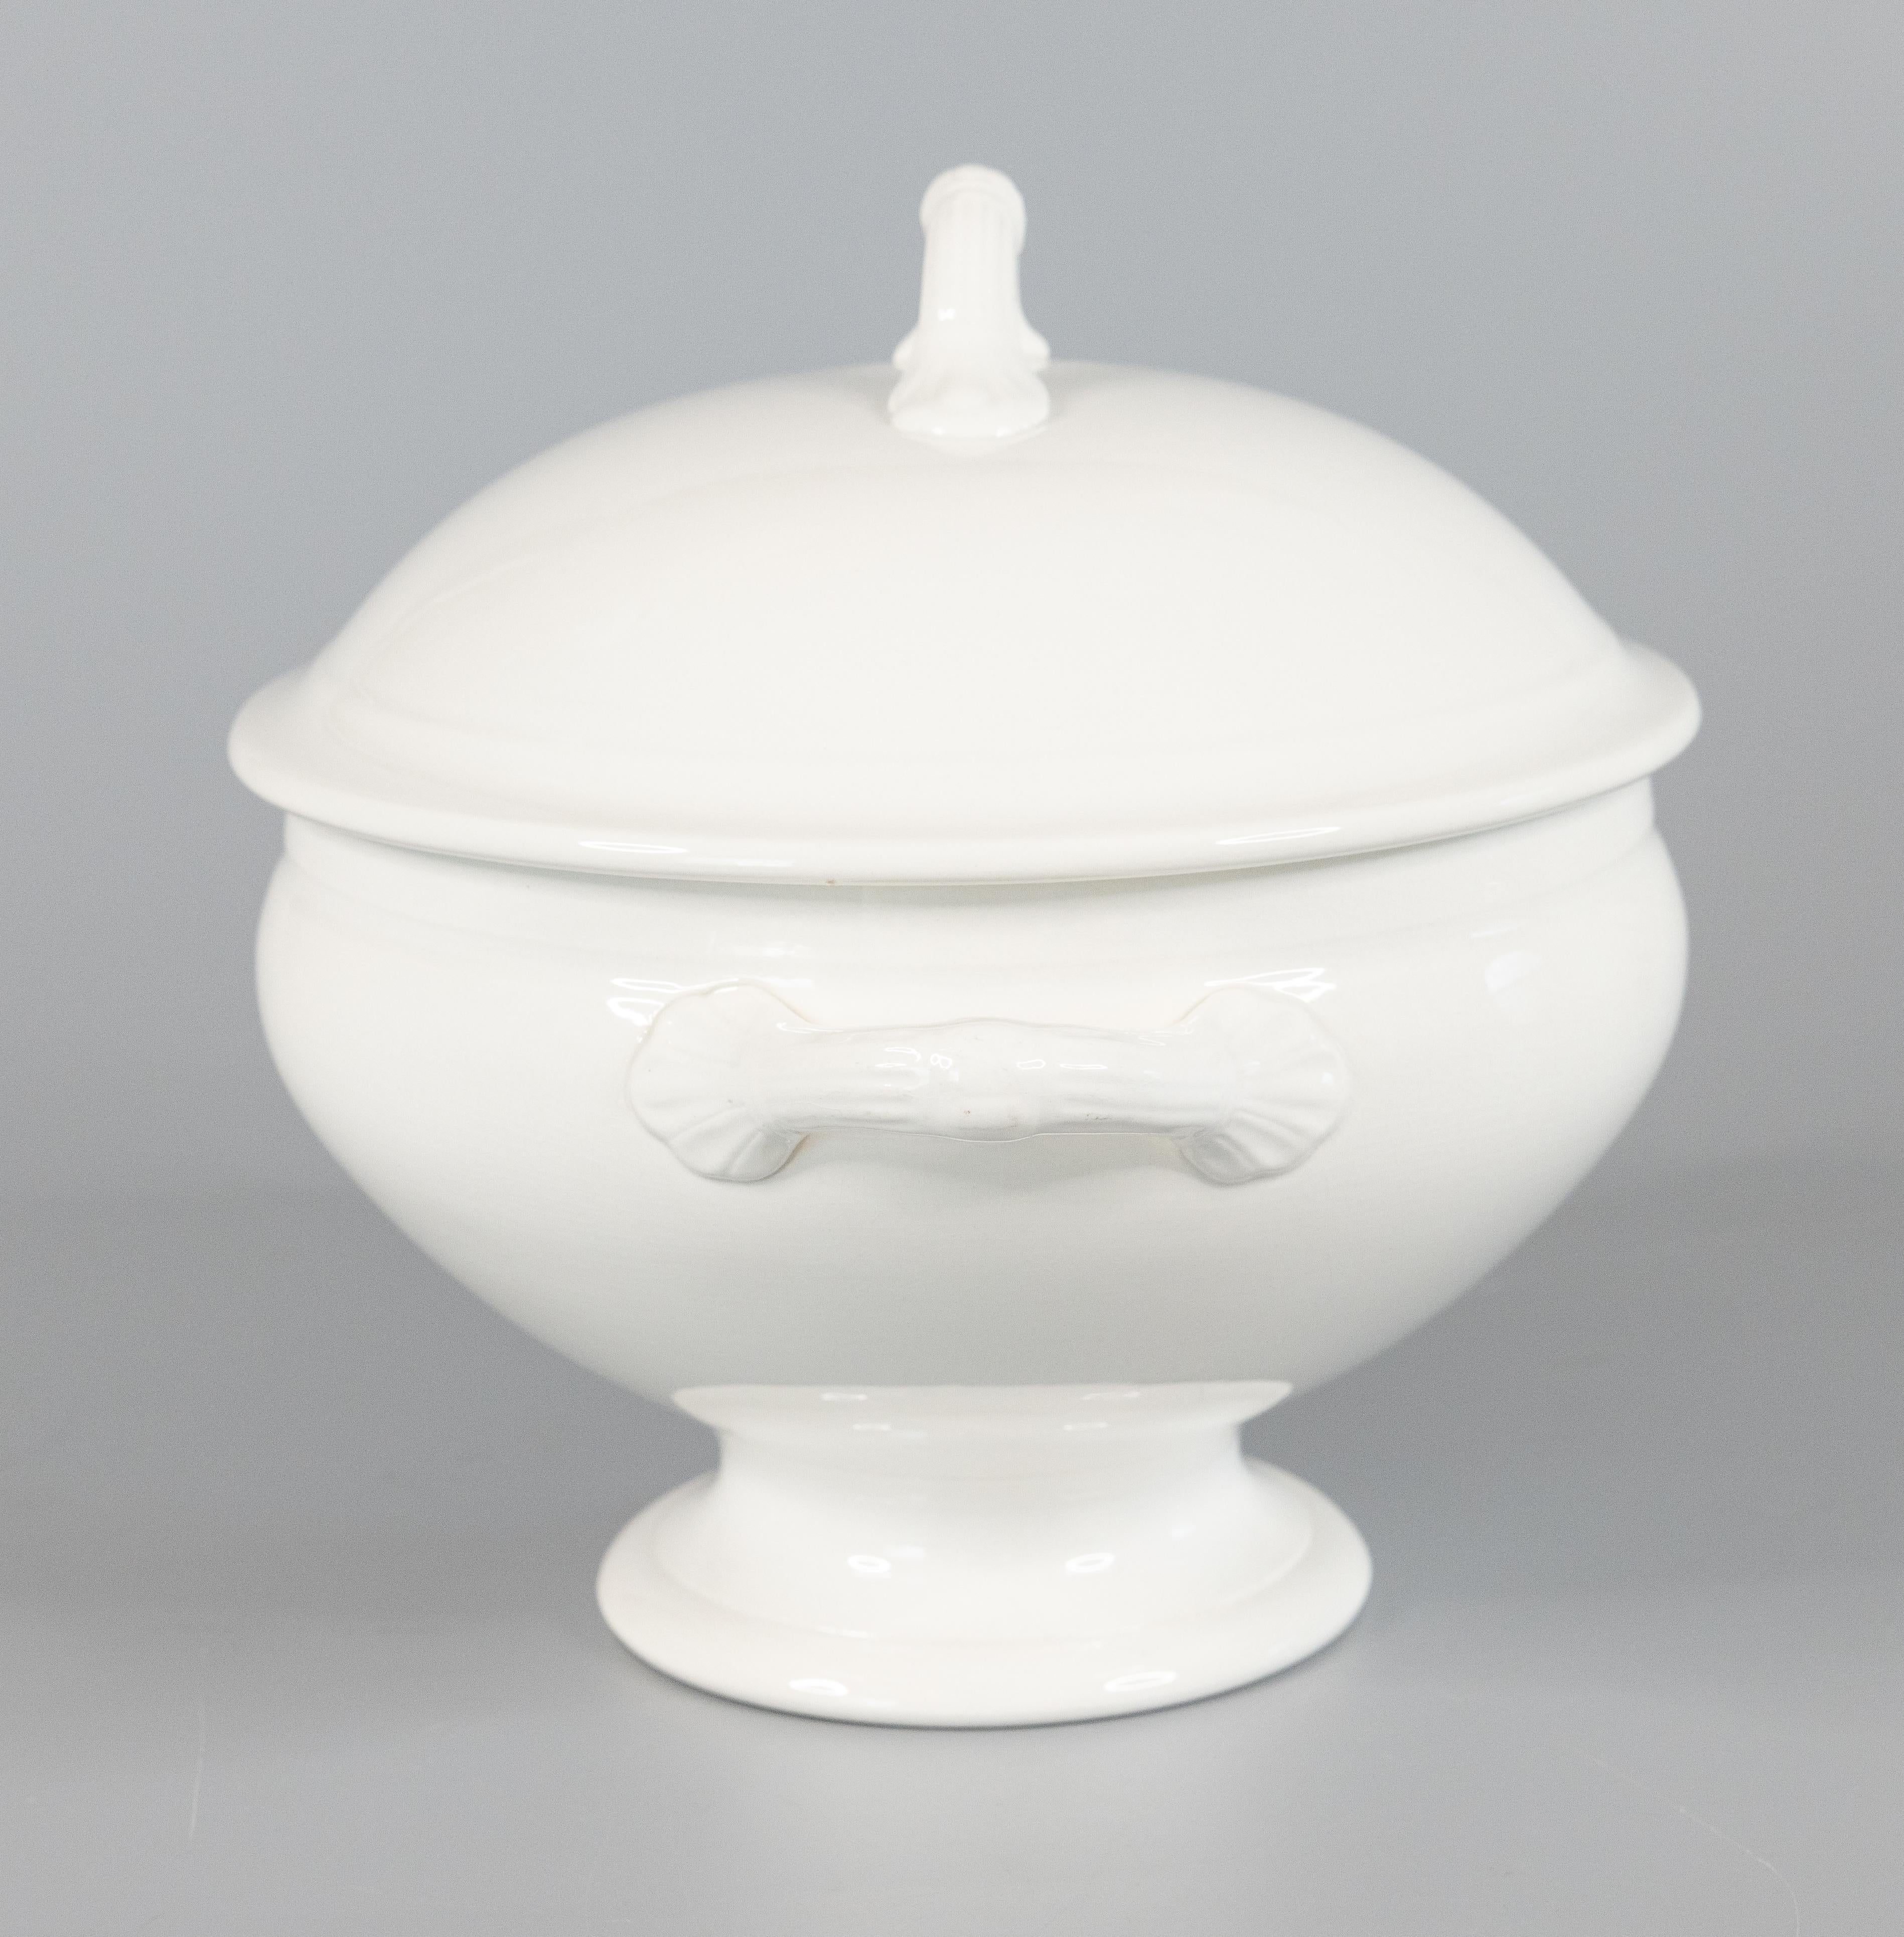 A gorgeous antique Belgian white ironstone lidded soup tureen made in Nimy, Belgium circa 1900. Maker's mark on reverse. This fine soup tureen has simple clean lines, perfect for the modern home, and would be lovely for display or serving at your